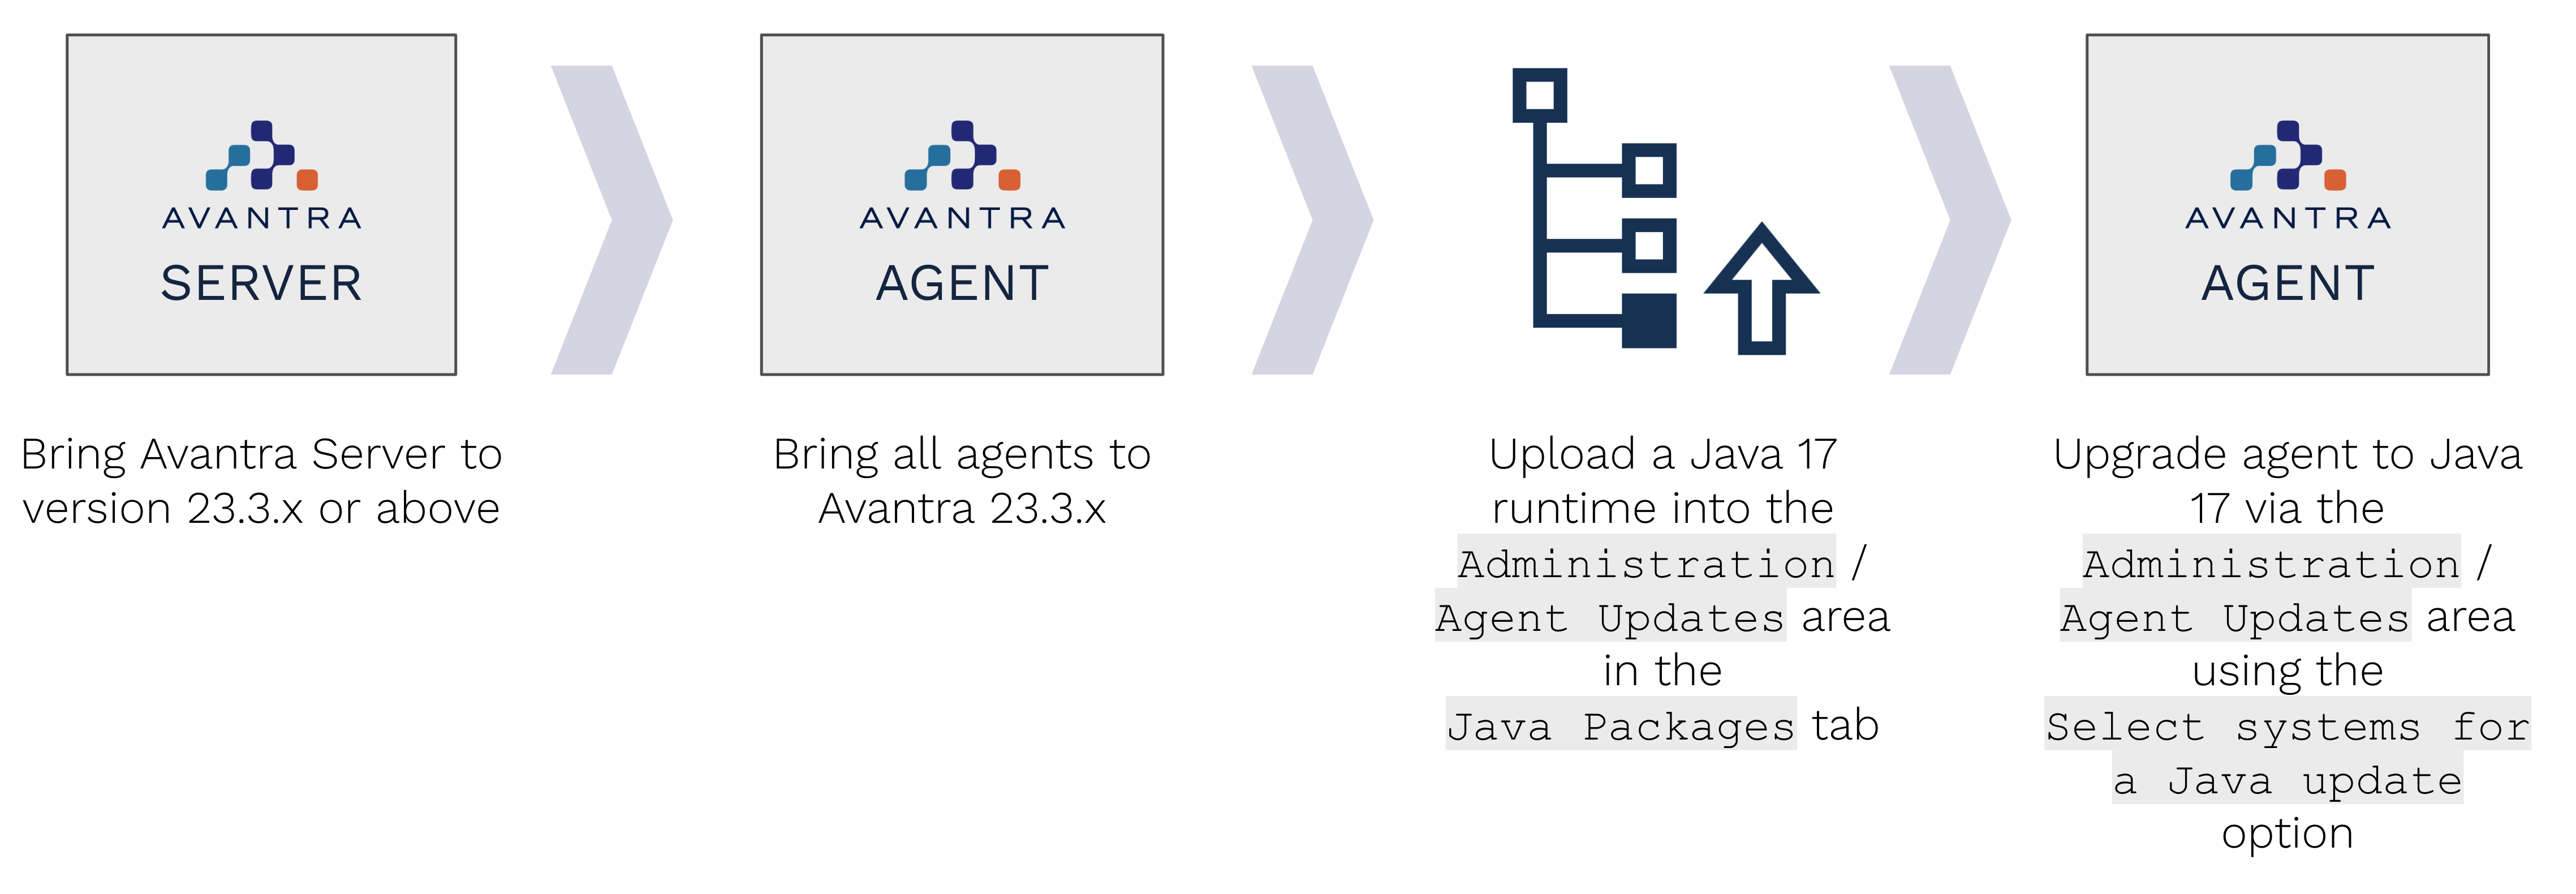 Upgrade path for Agents to Java 17